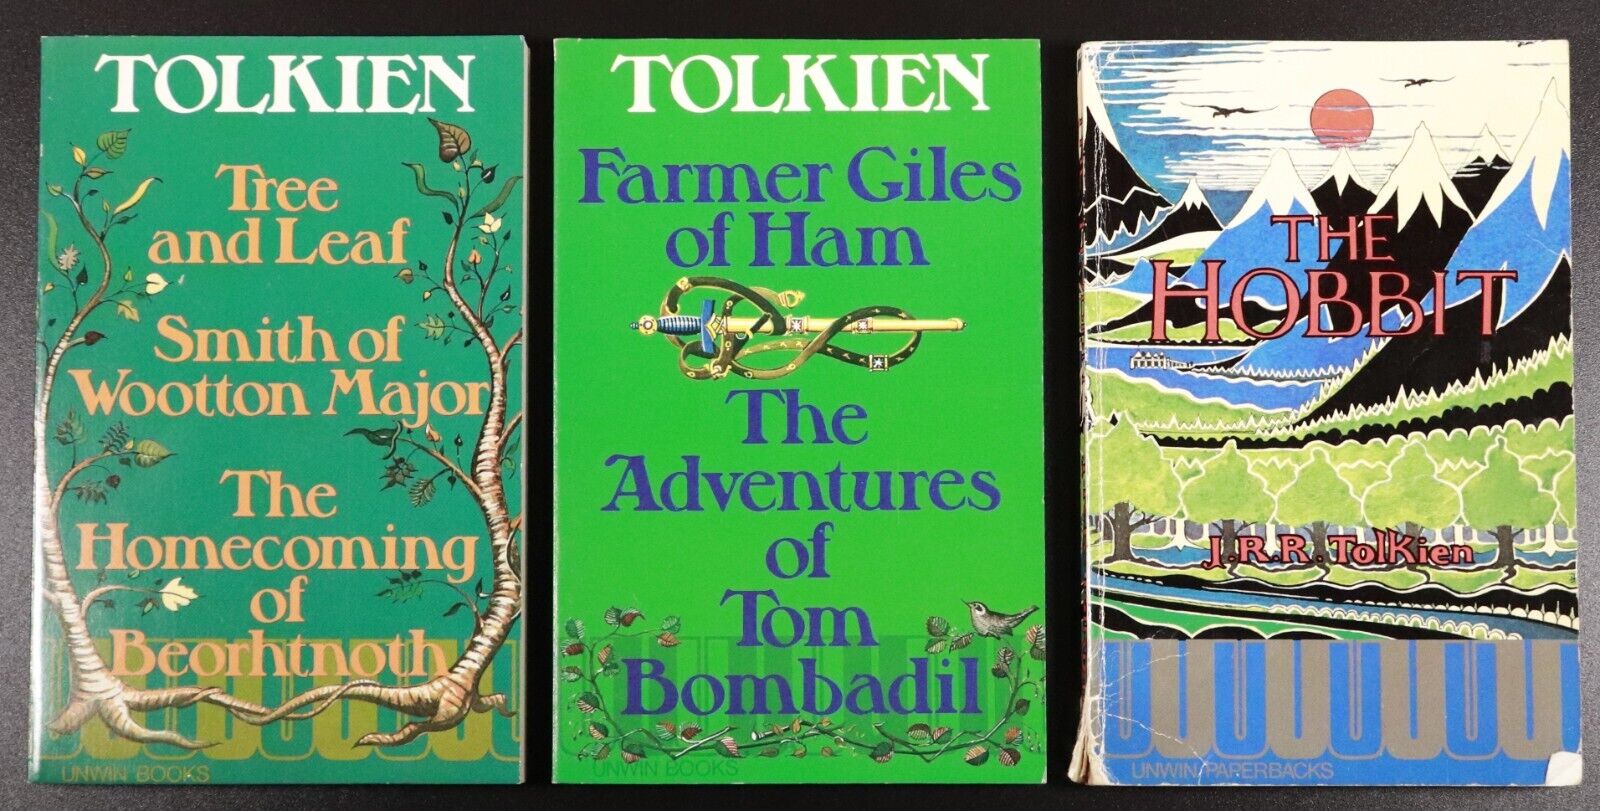 1975 3vol The Hobbit & Other Stories by J.R.R. Tolkien Fantasy Fiction Book Set - 0